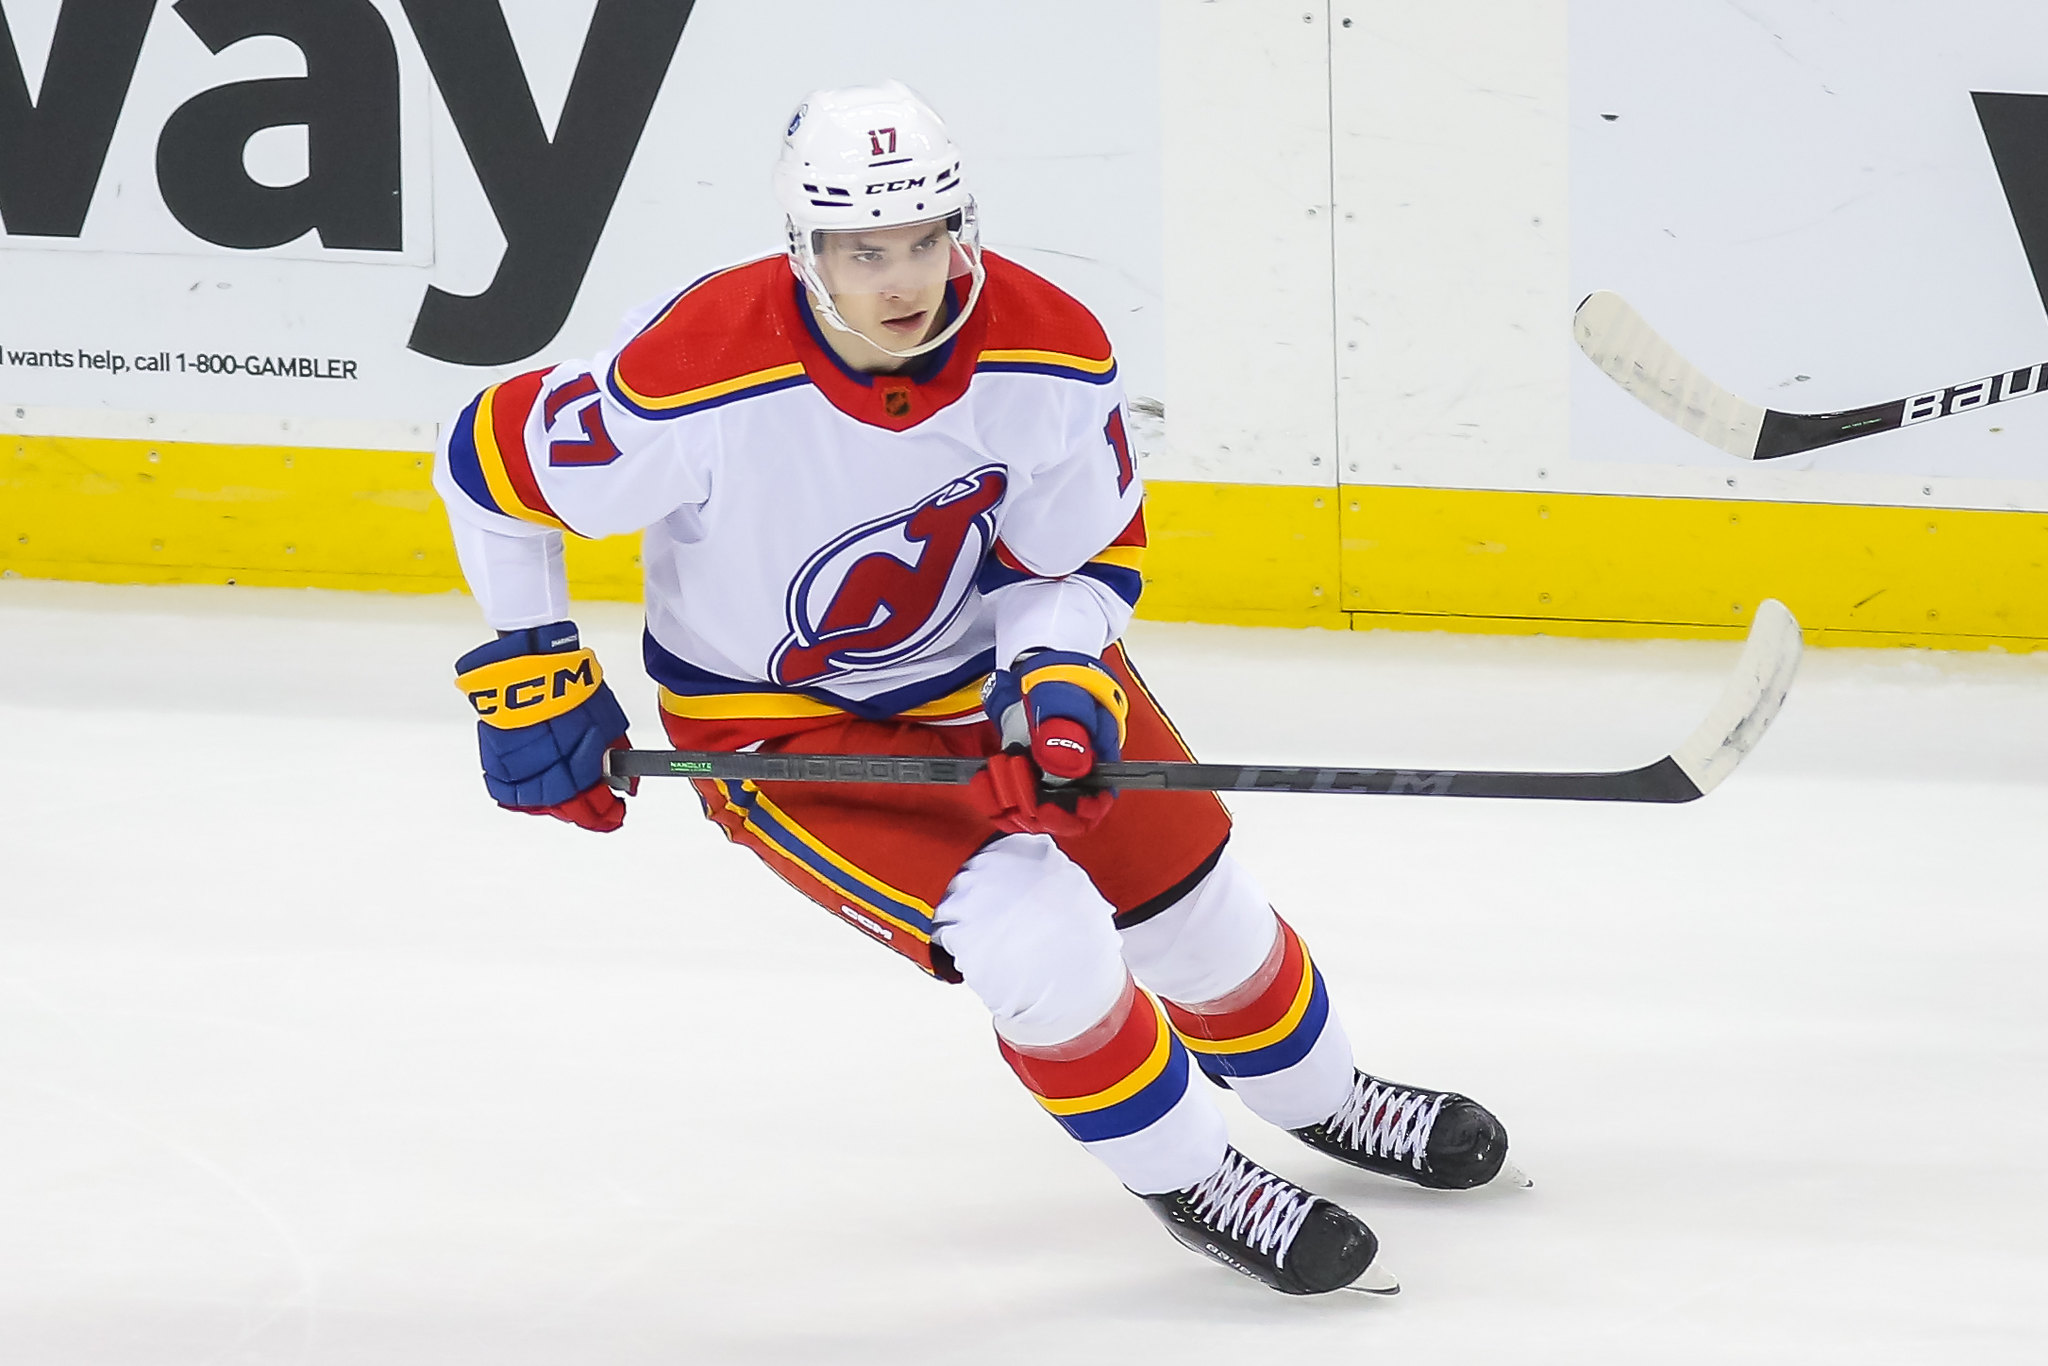 Will Yegor Sharangovich Score a Goal Against the Red Wings on October 22?